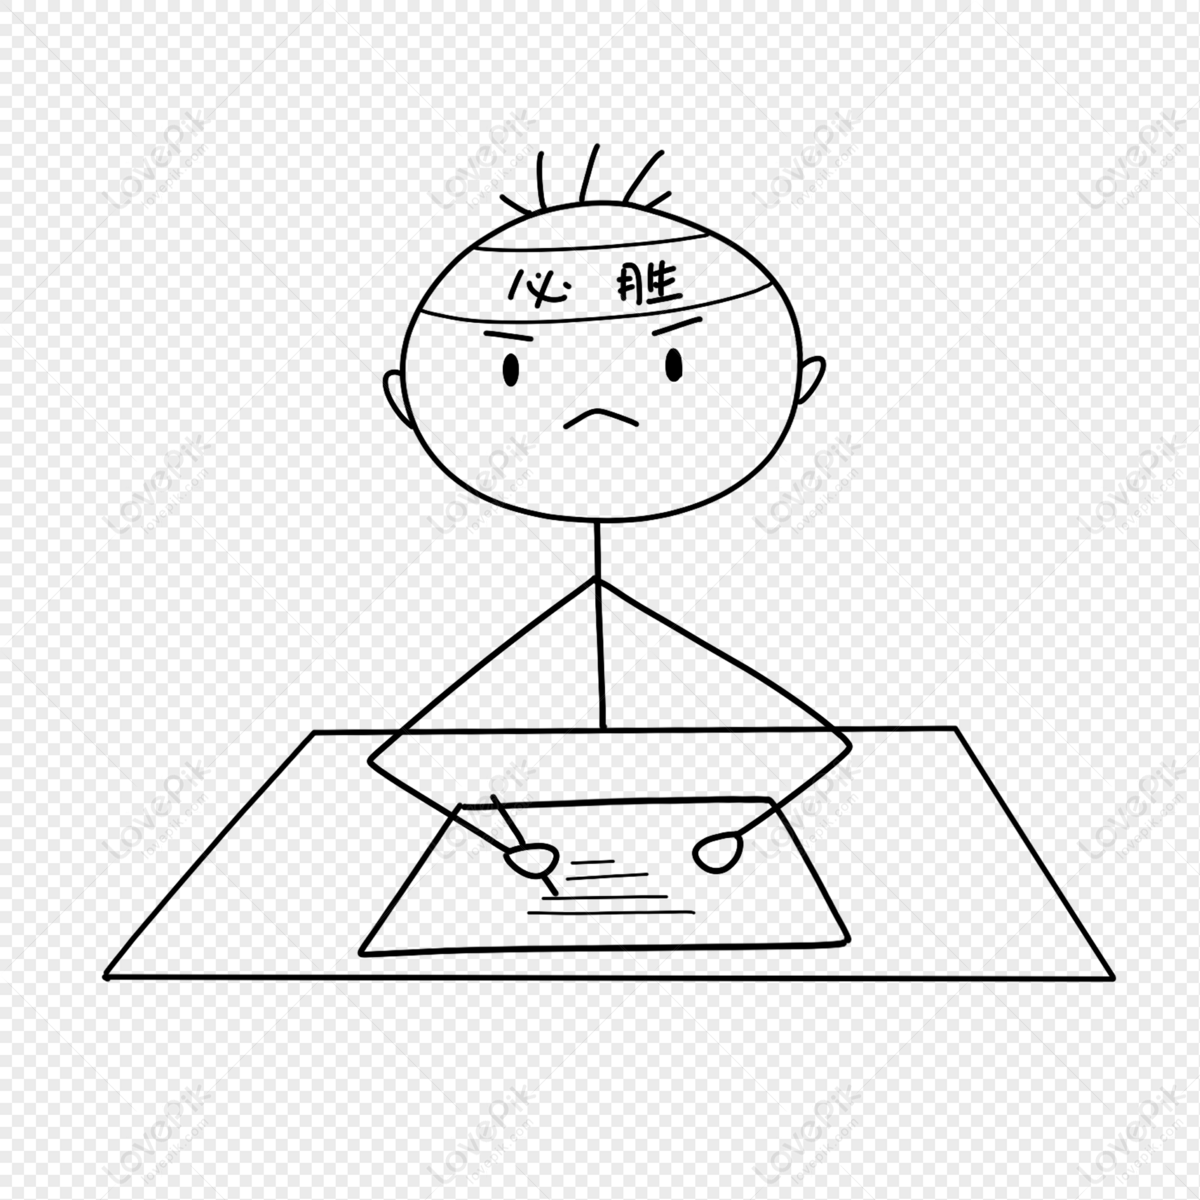 stick-figure-learning-png-transparent-image-and-clipart-image-for-free